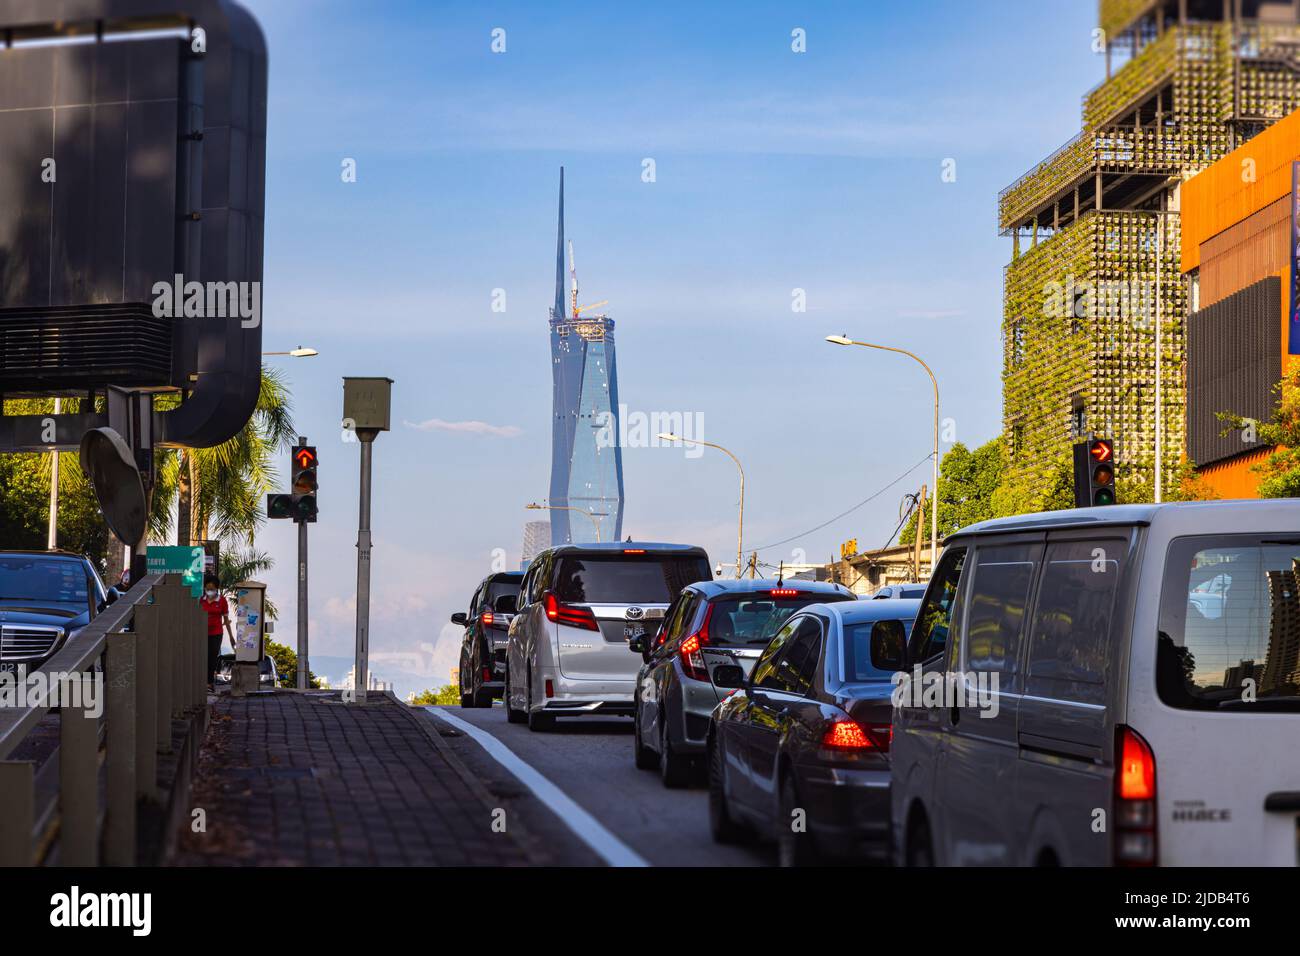 Kuala Lumpur, Malaysia - June 8, 2022: The new second tallest building in the world, Merdeka 118. The new icon behind a busy junction with high traffi Stock Photo